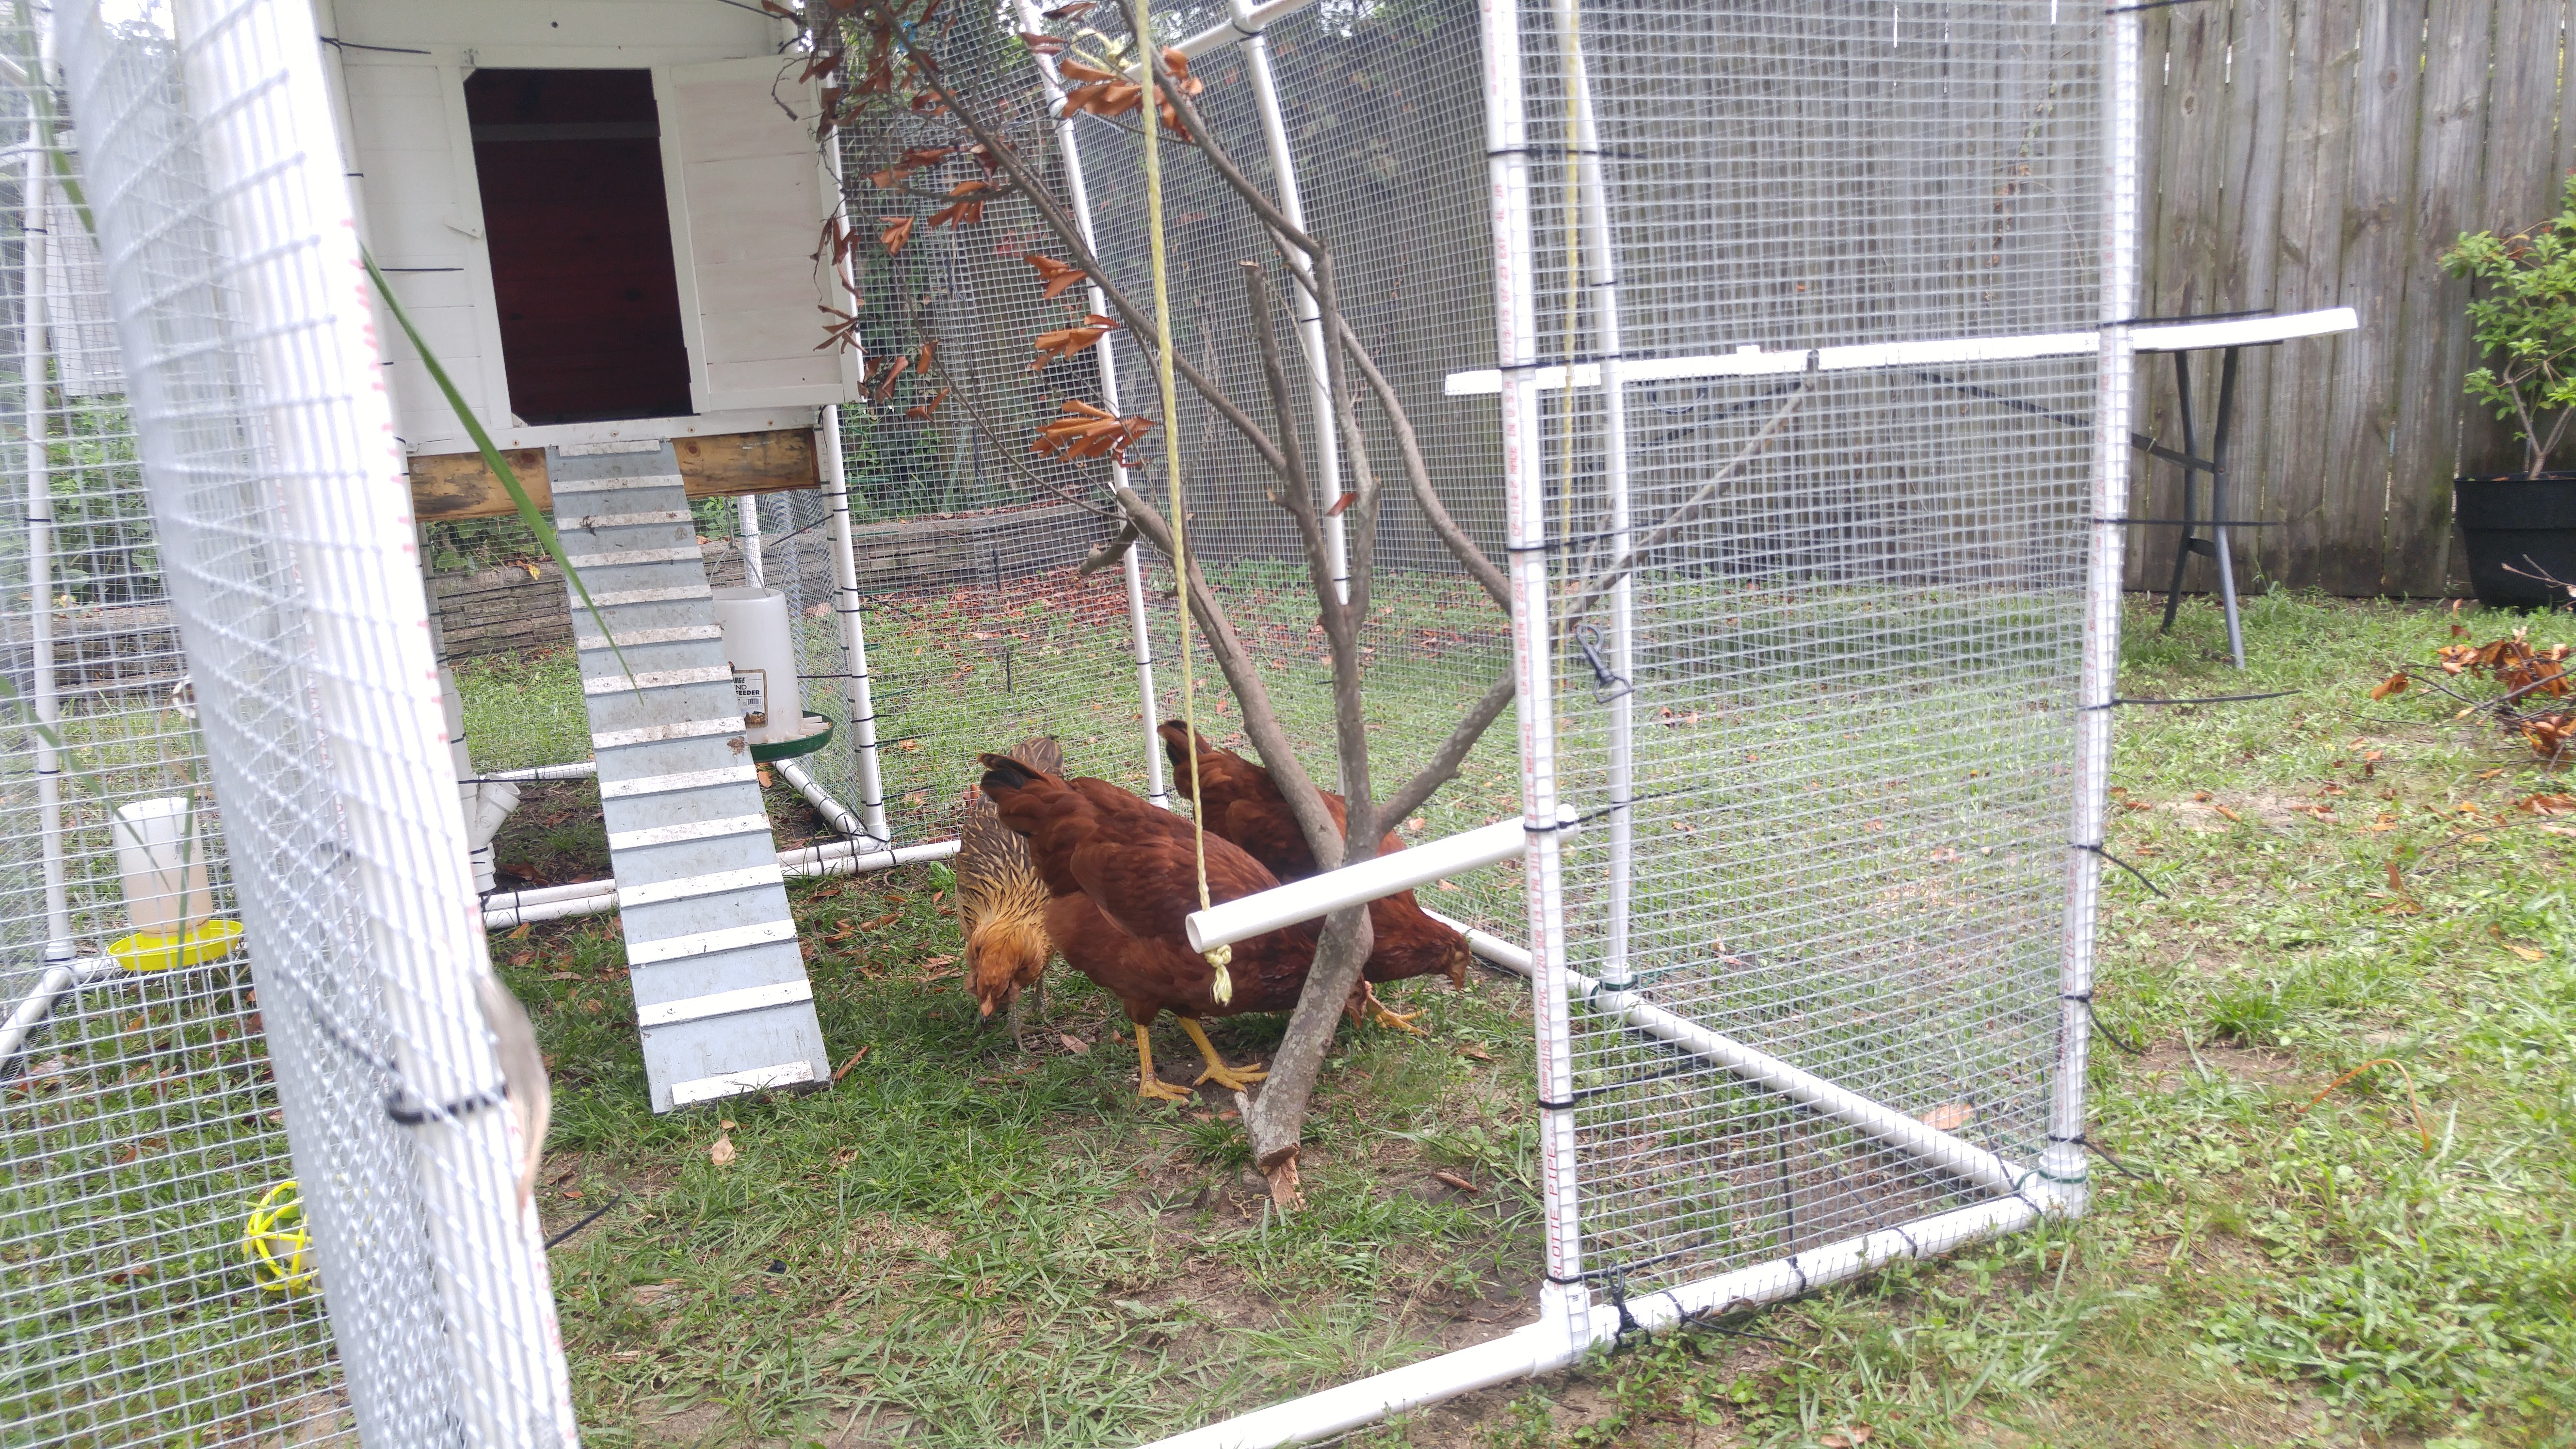 Our coop begins to evolve at this point. The girls were definitely outgrowing it, but we needed it to last a bit longer.